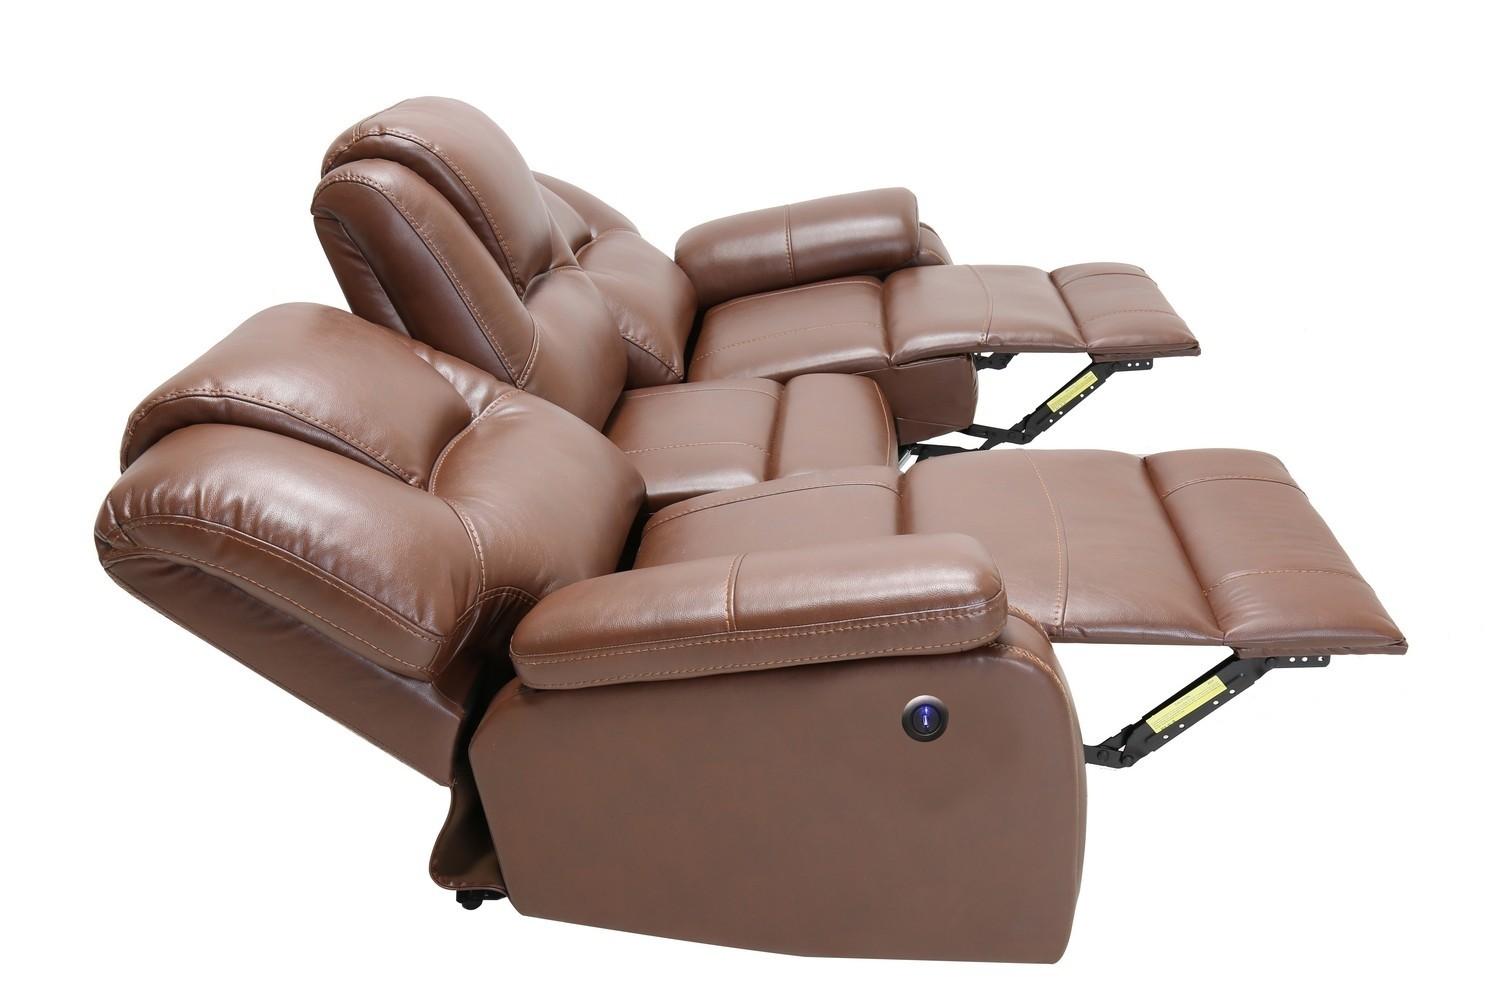 

        
Global United 7993 Reclining Sofa Brown Leather Air Material 083398863013
